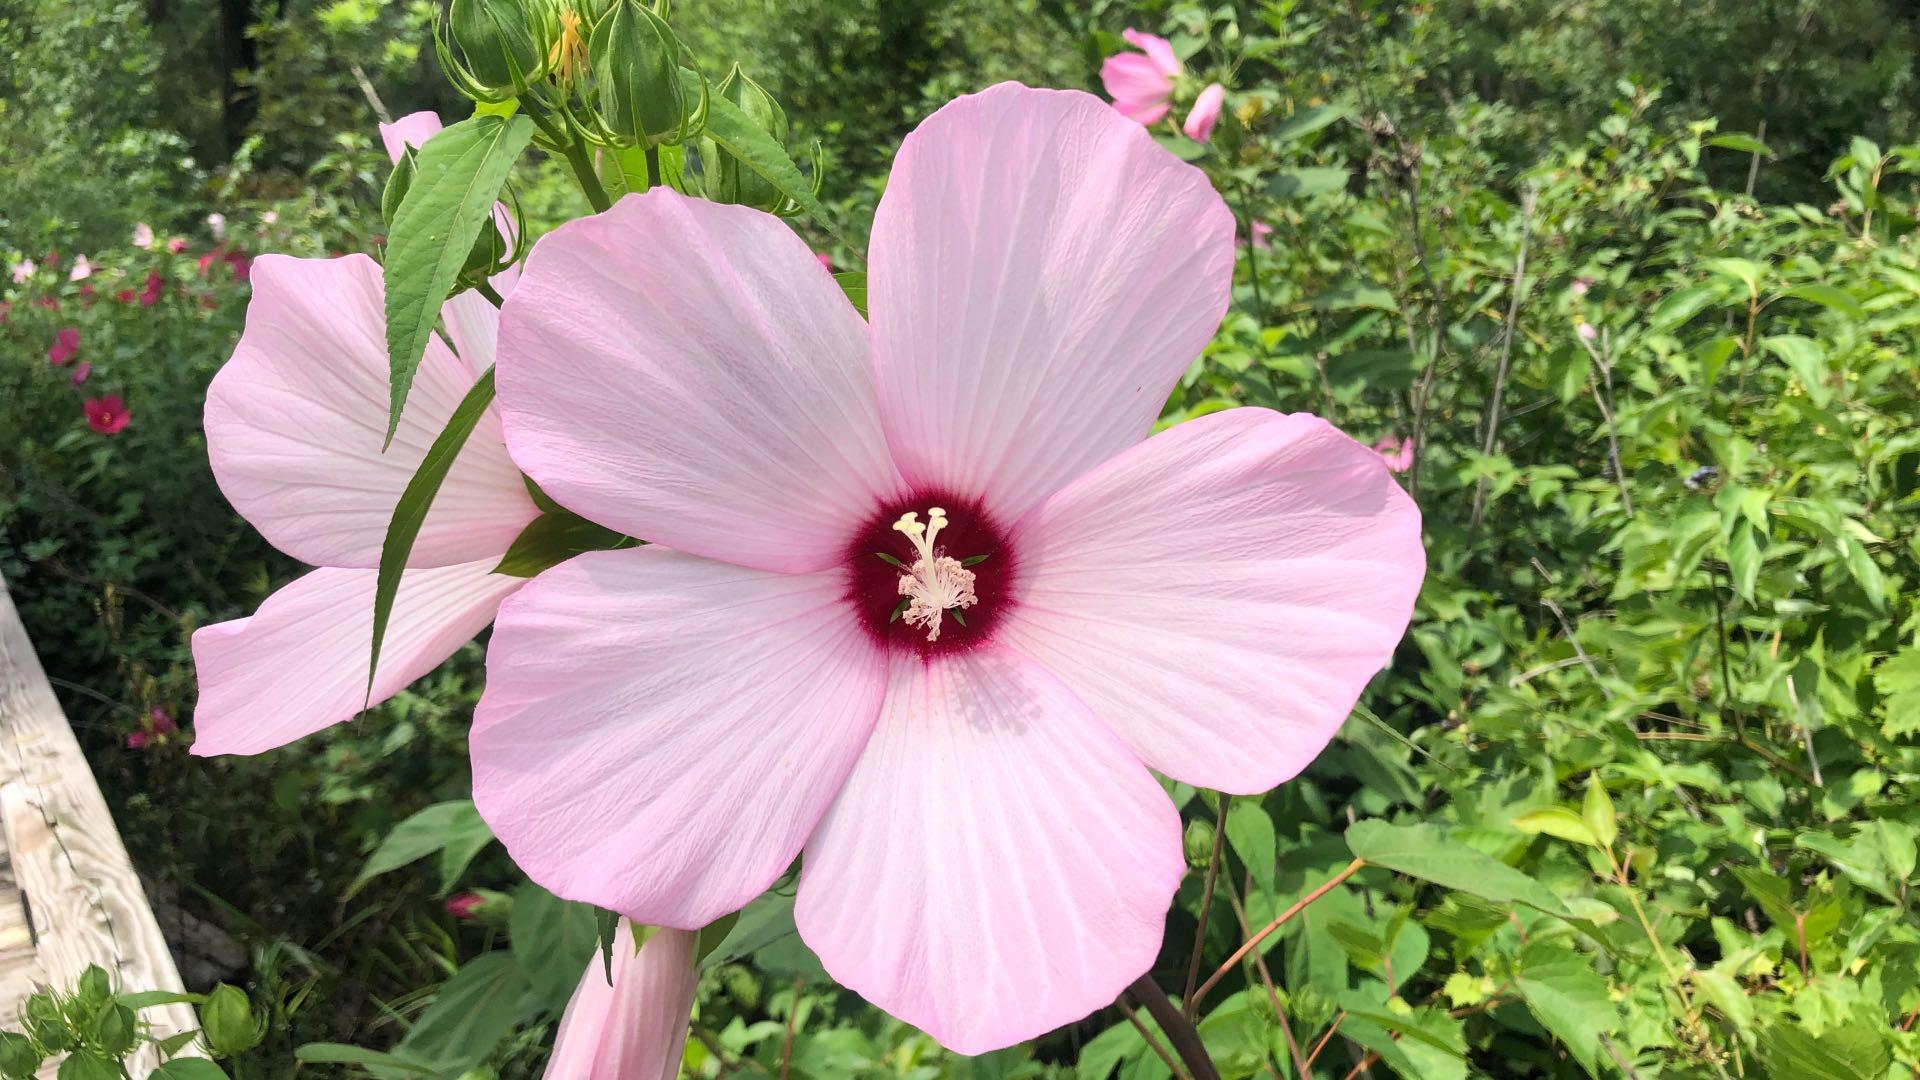 A swamp rose mallow bloom, with its characteristic reddish-purple "throat" at the base of its petals (usually but not always present). (Patty Wetli / WTTW News)